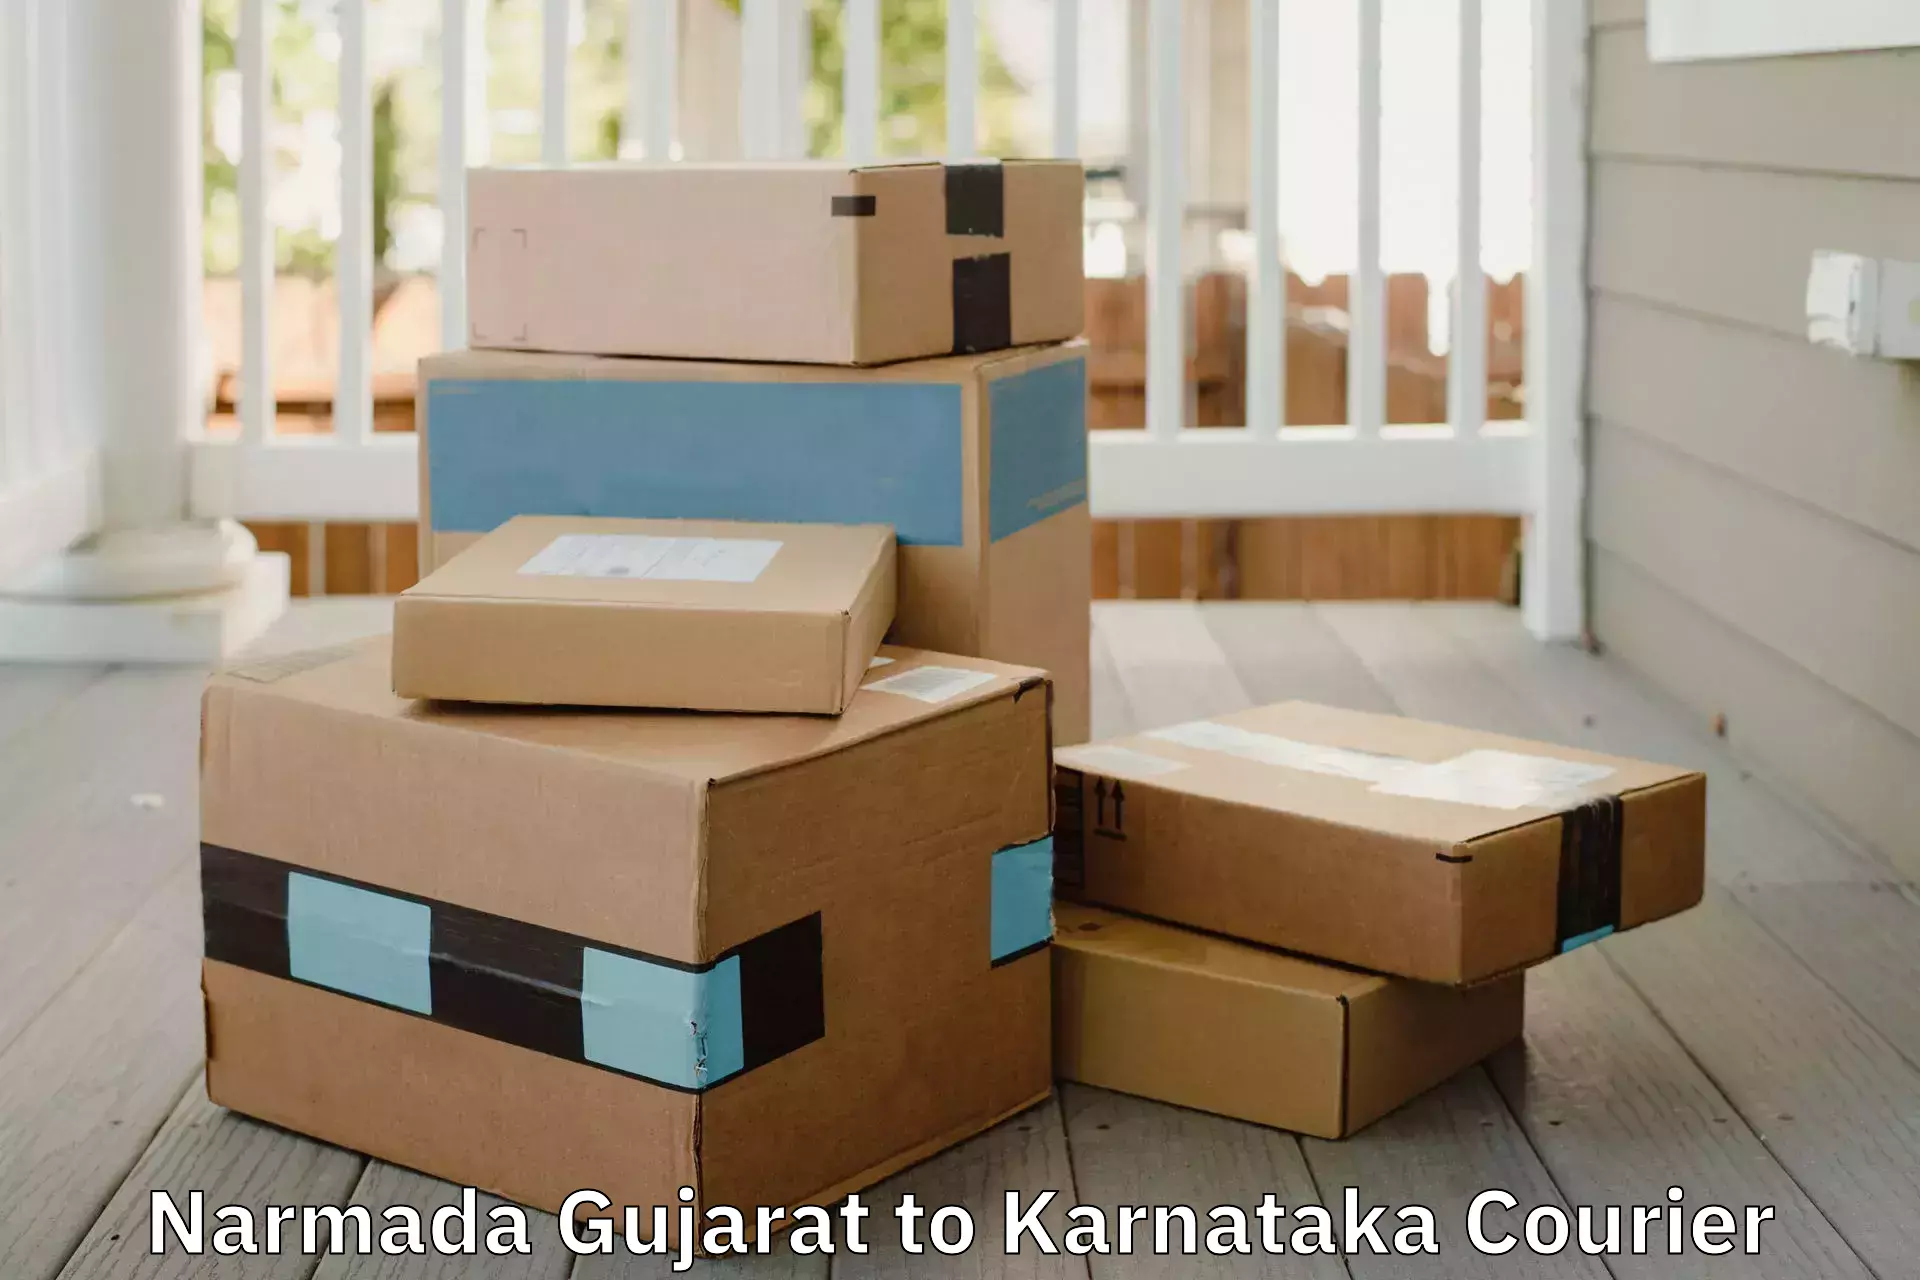 Professional moving assistance in Narmada Gujarat to Mangalore Port